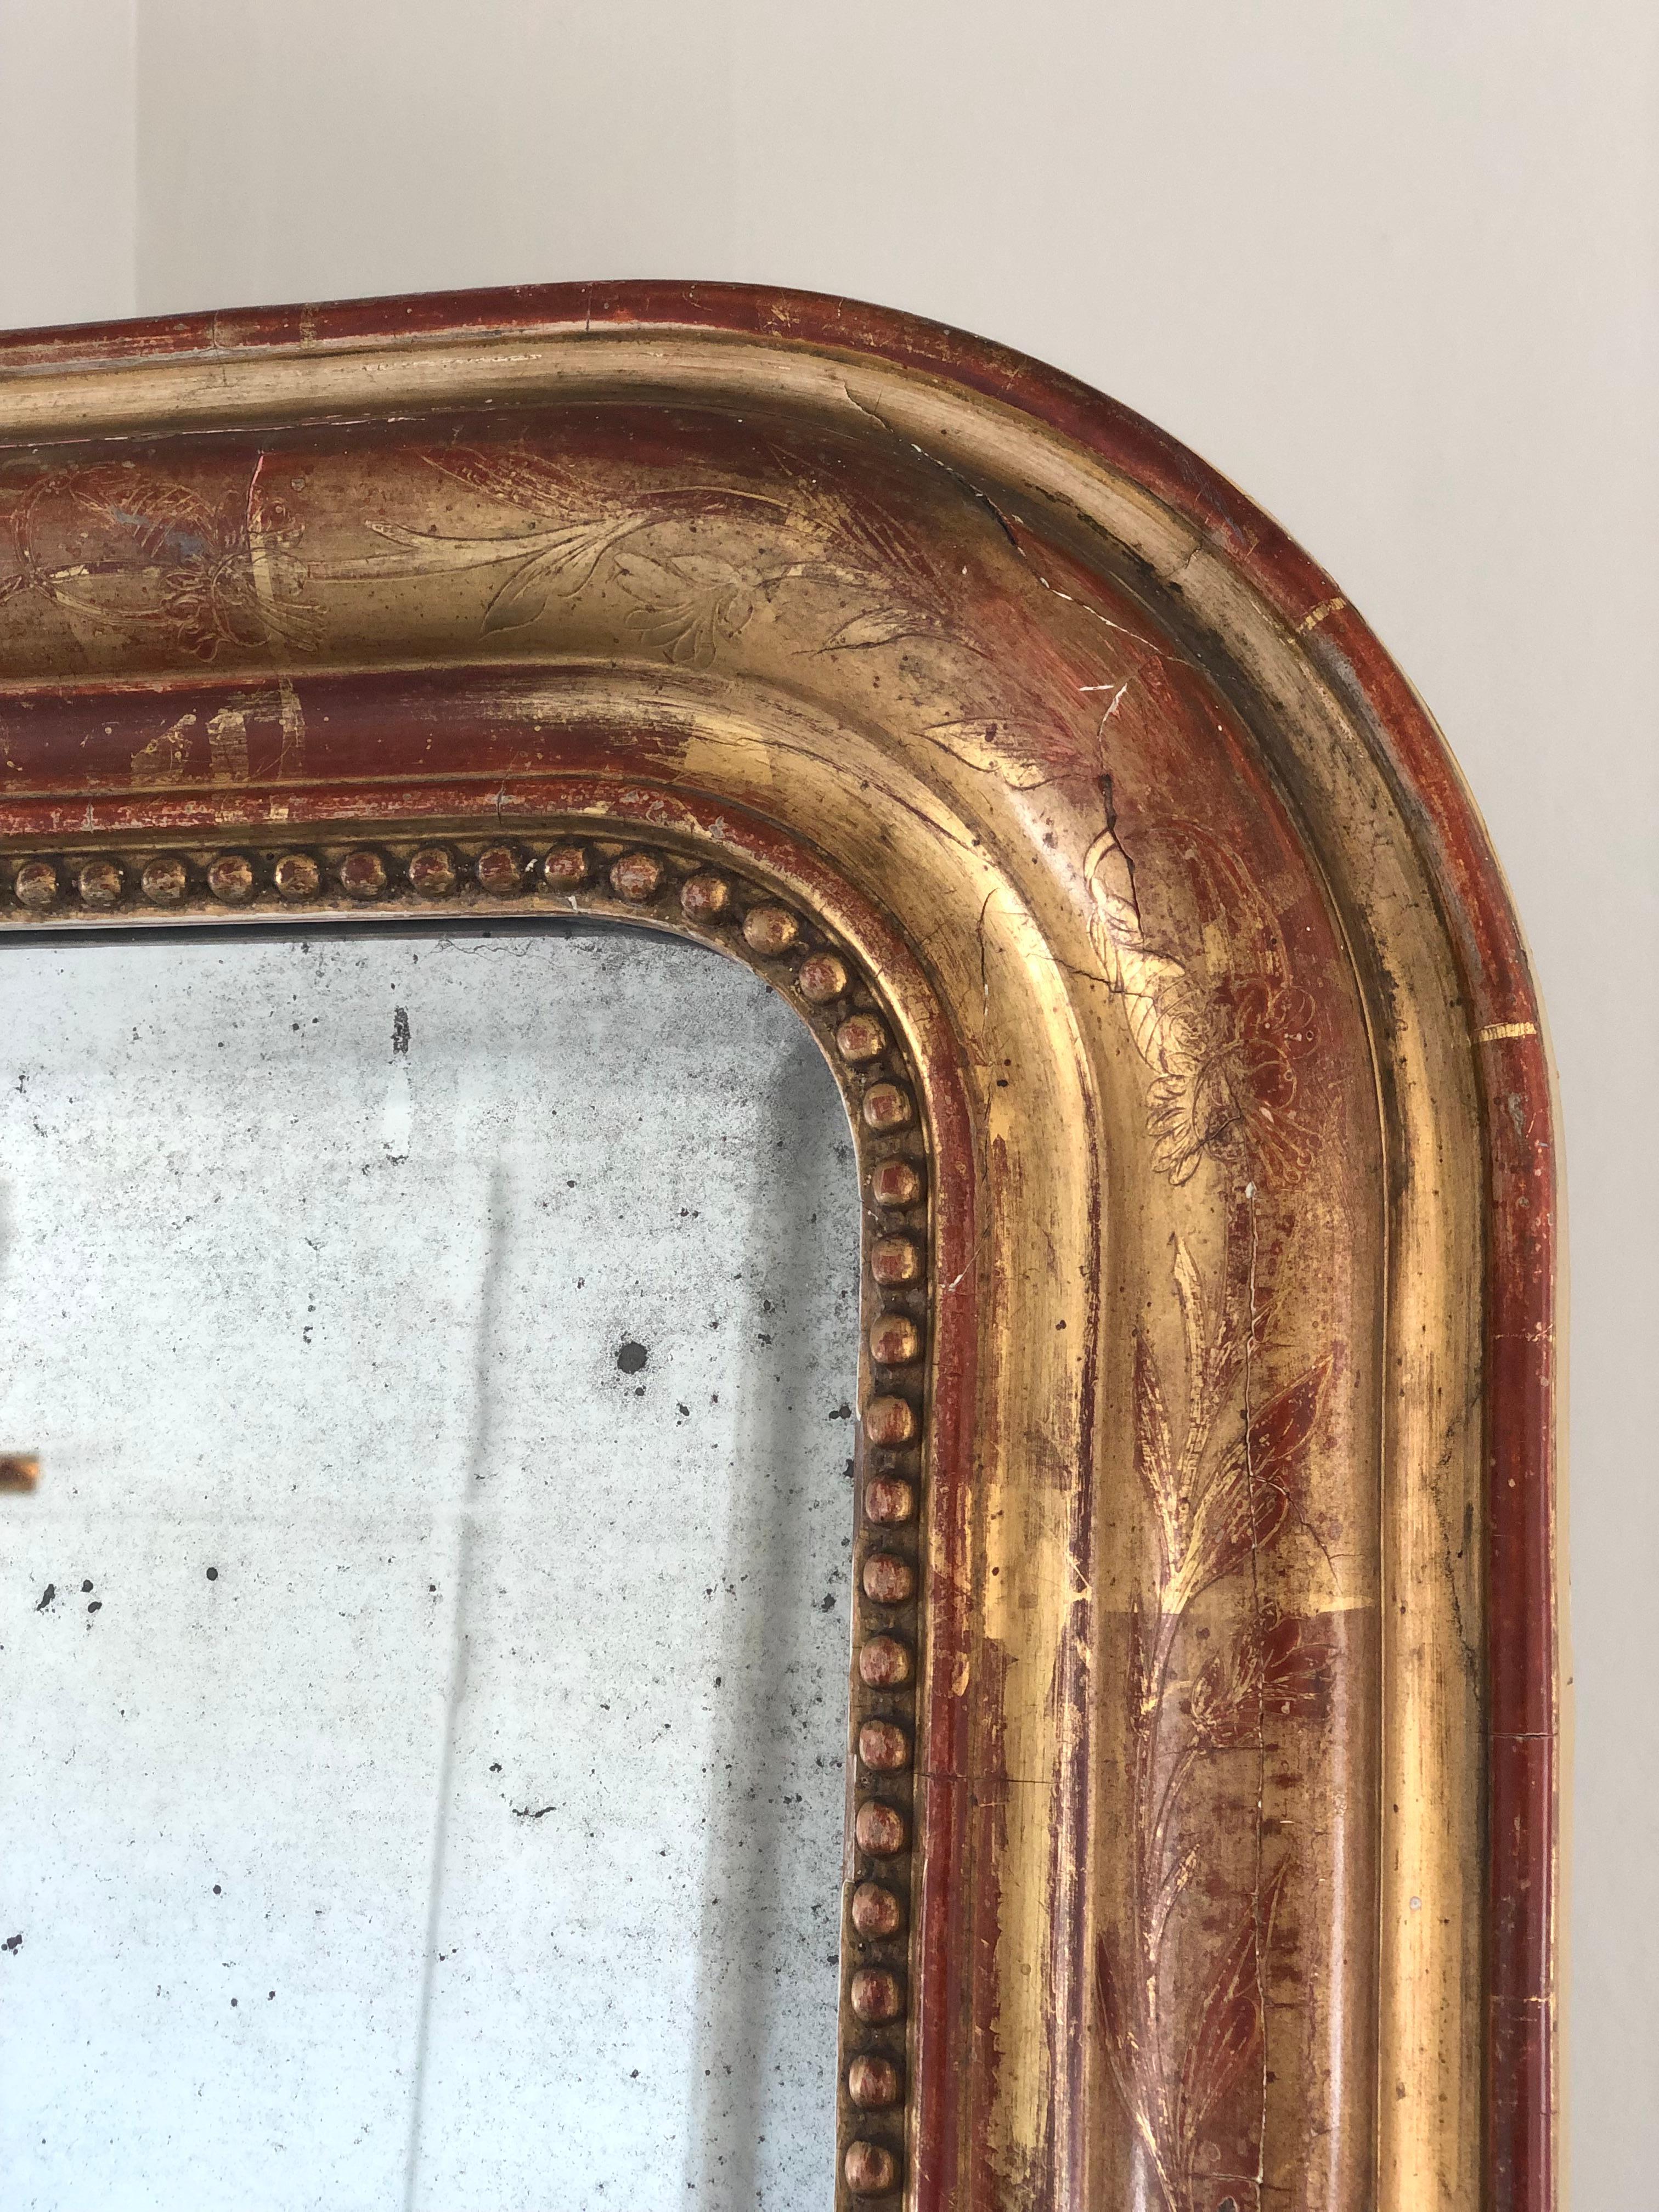 A very high-quality antique Louis Philippe mirror from France, late 19th century. An appearance with grandeur. The richly carved giltwood frame with a pearl rim and curved top corners has a beautiful worn gold leaf patina. Original mercury glass and